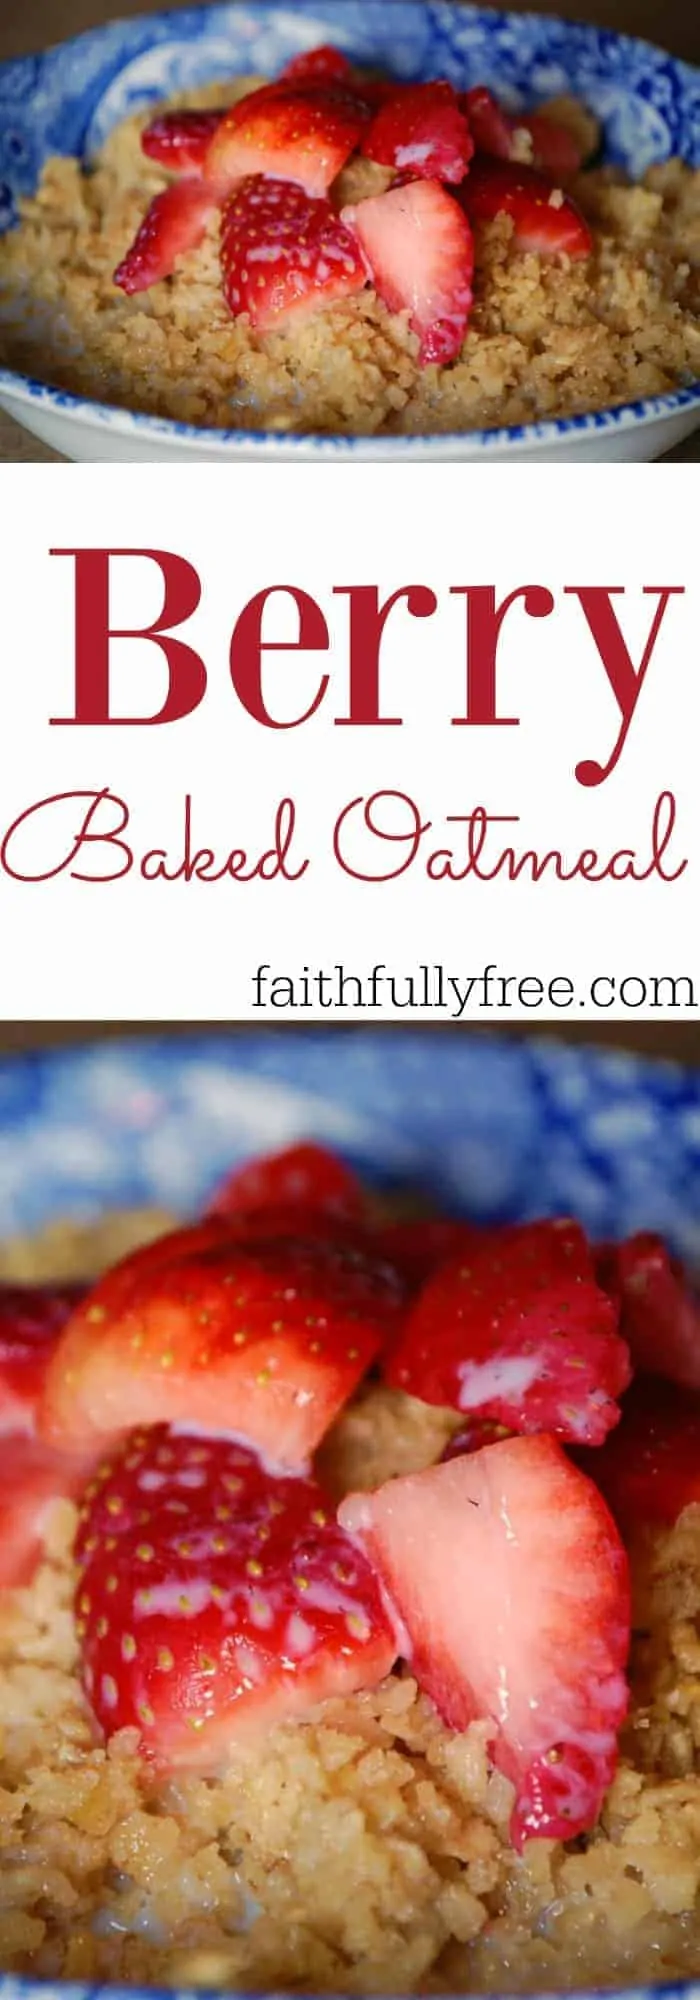 Berry Baked Oatmeal - Perfect For Winter Mornings